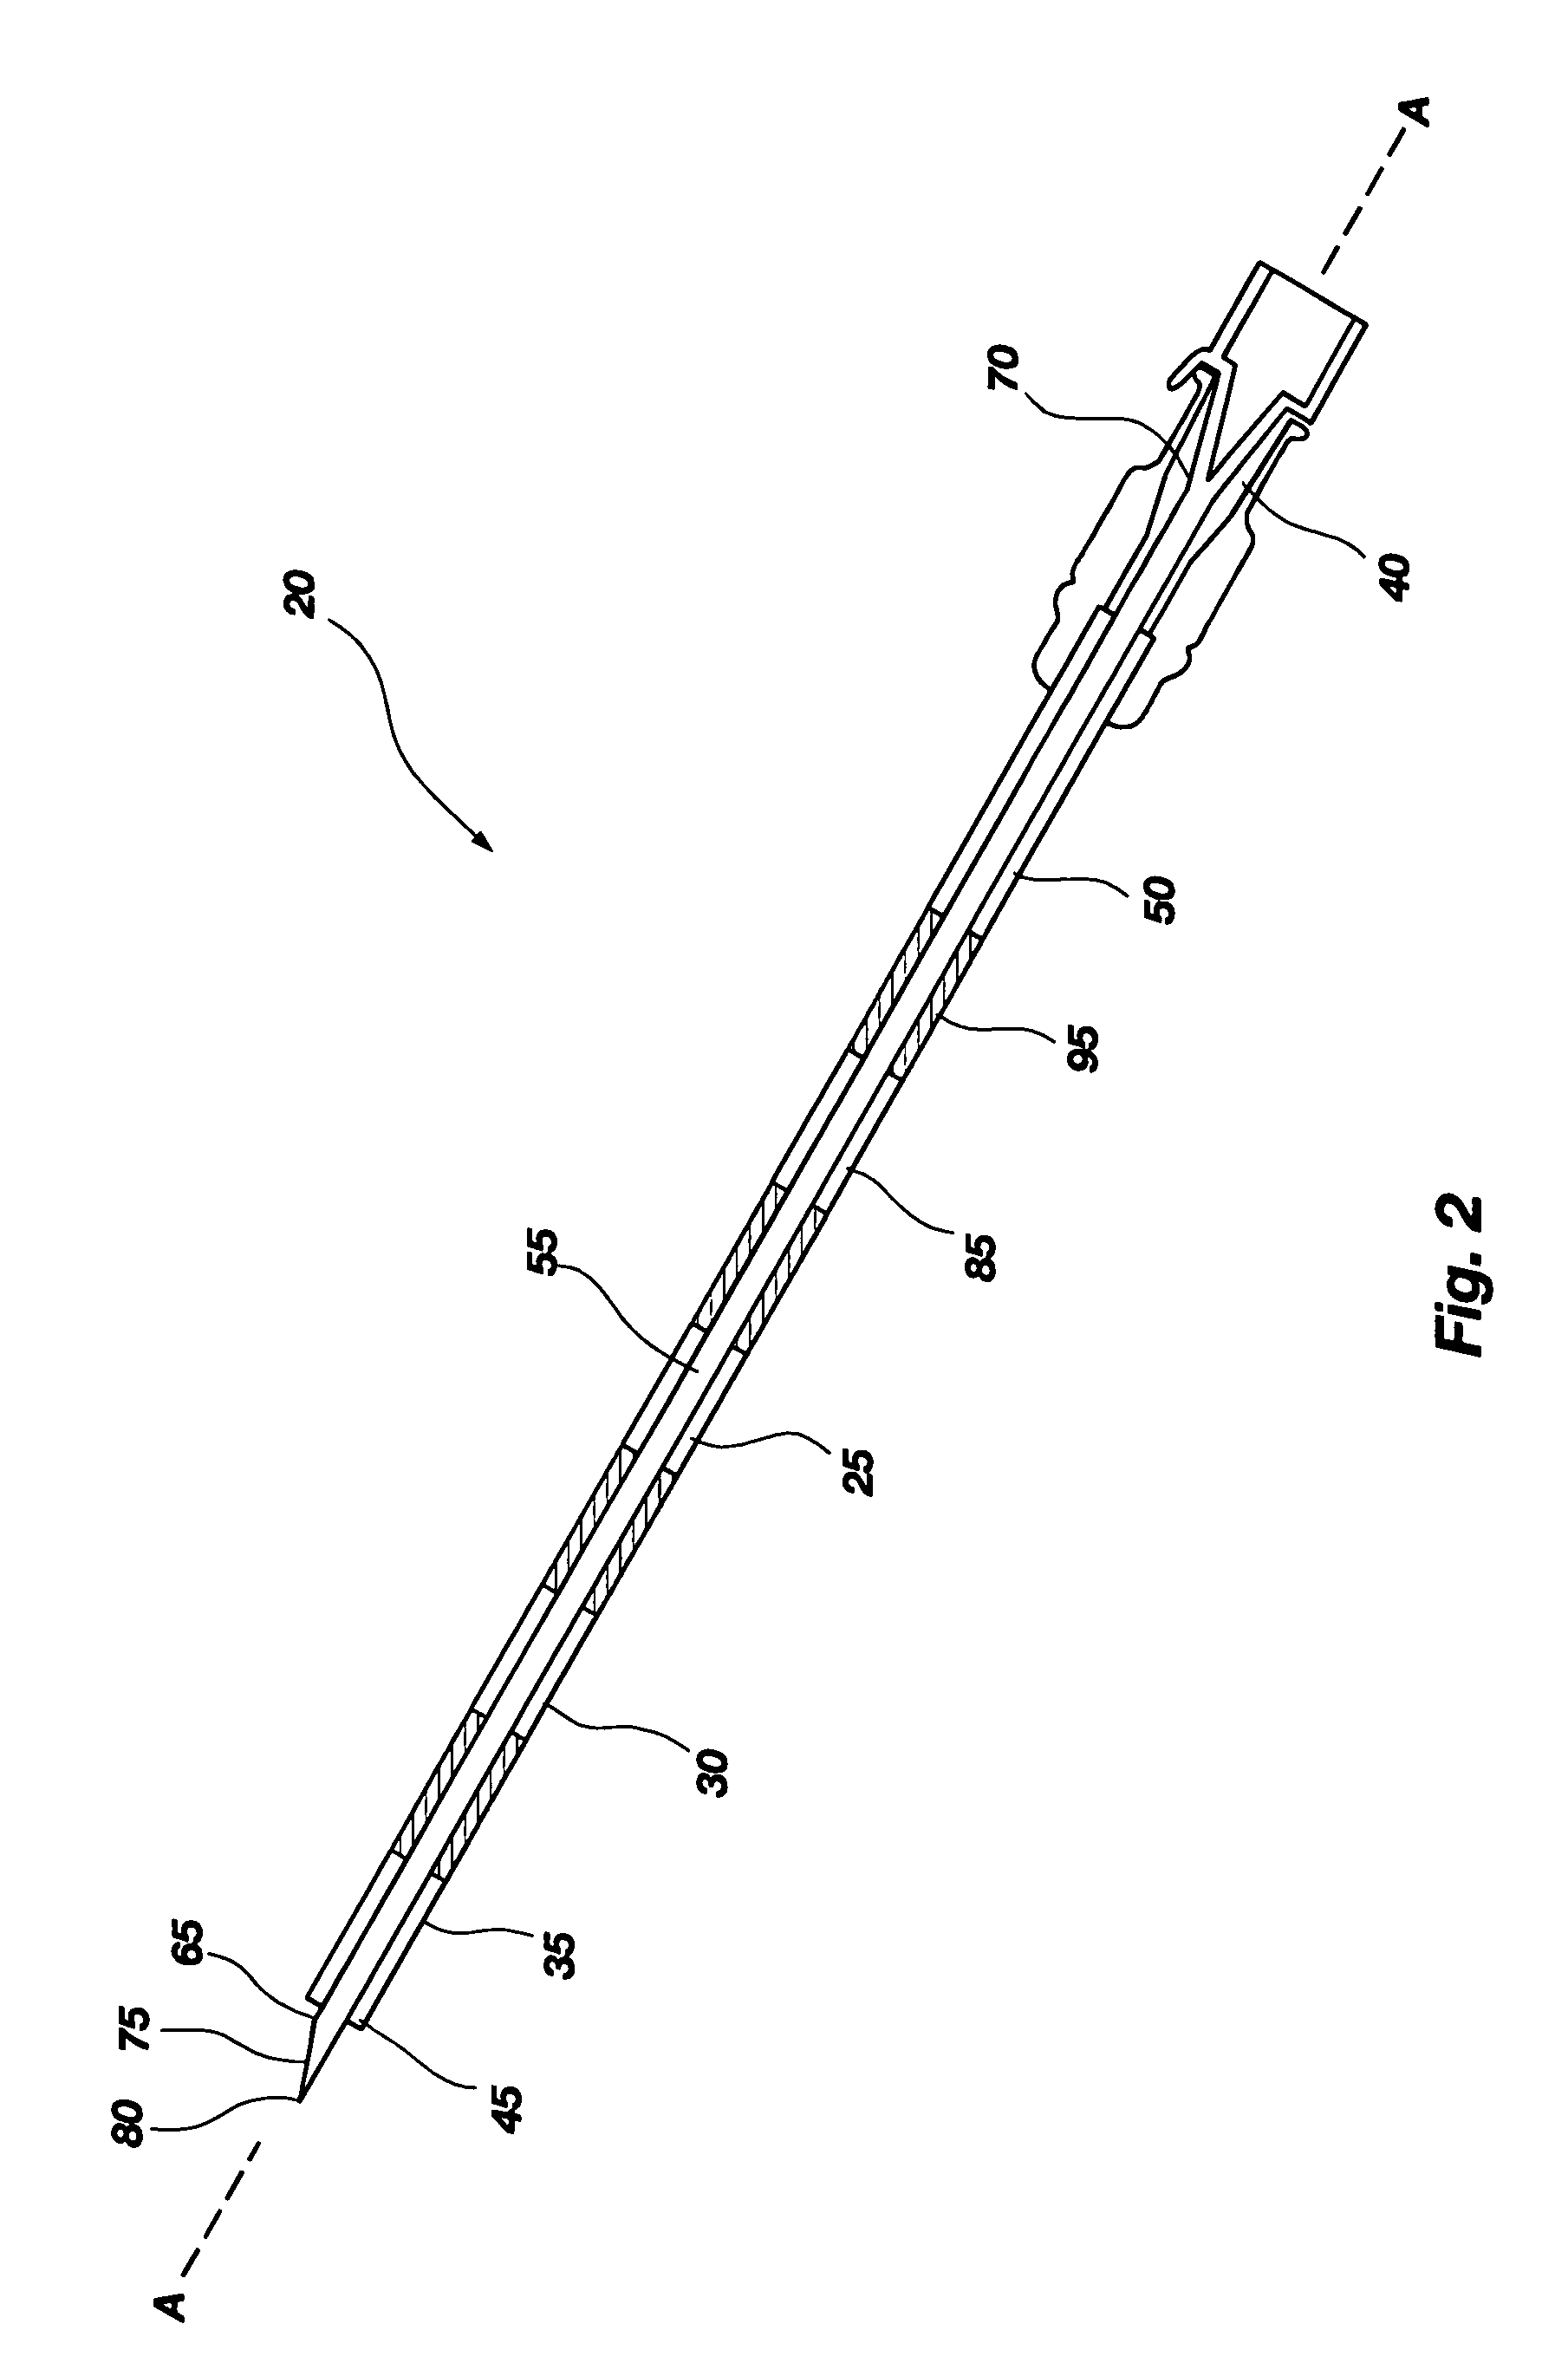 Apparatus and method for specific interstitial or subcutaneous diffusion and dispersion of medication